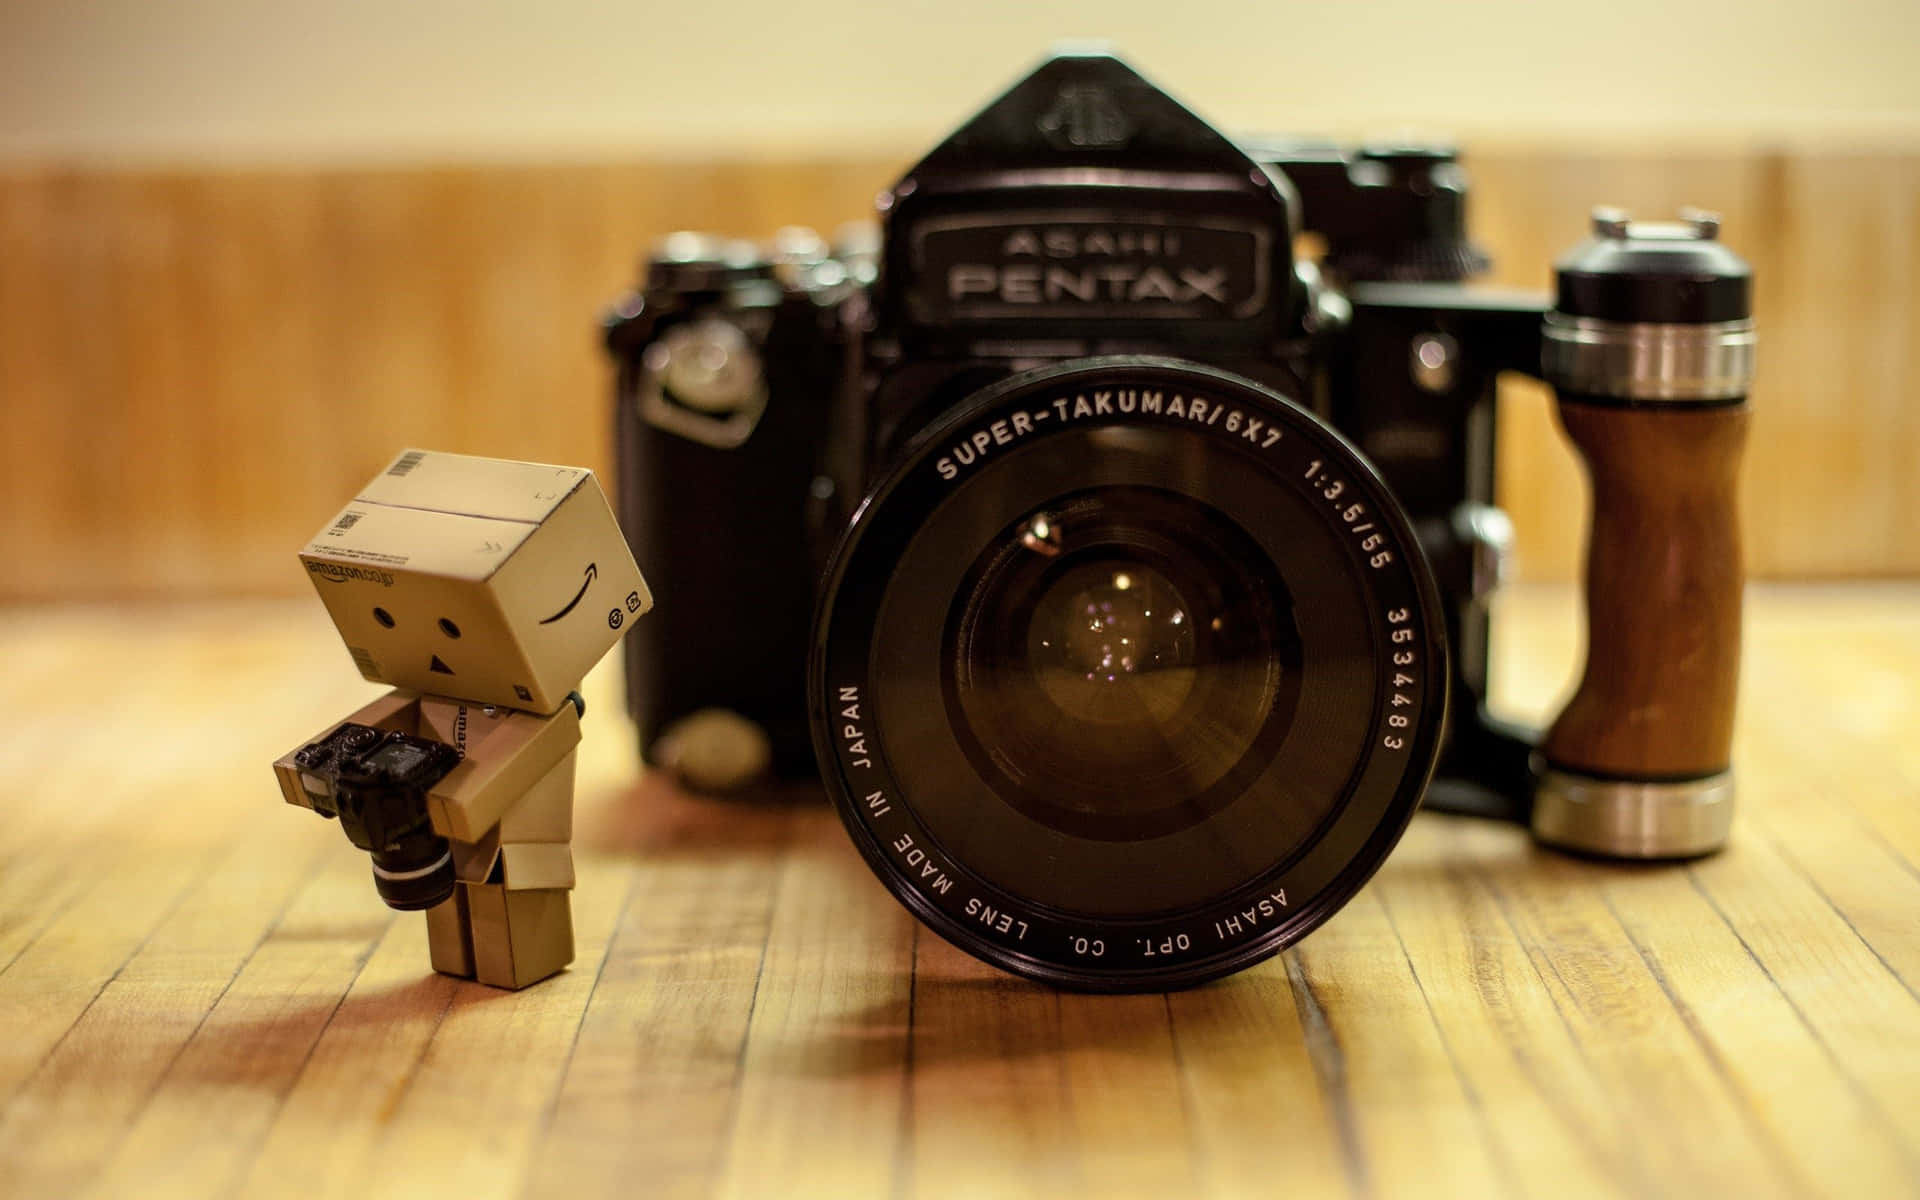 Pentax Photography Camera With Danbo